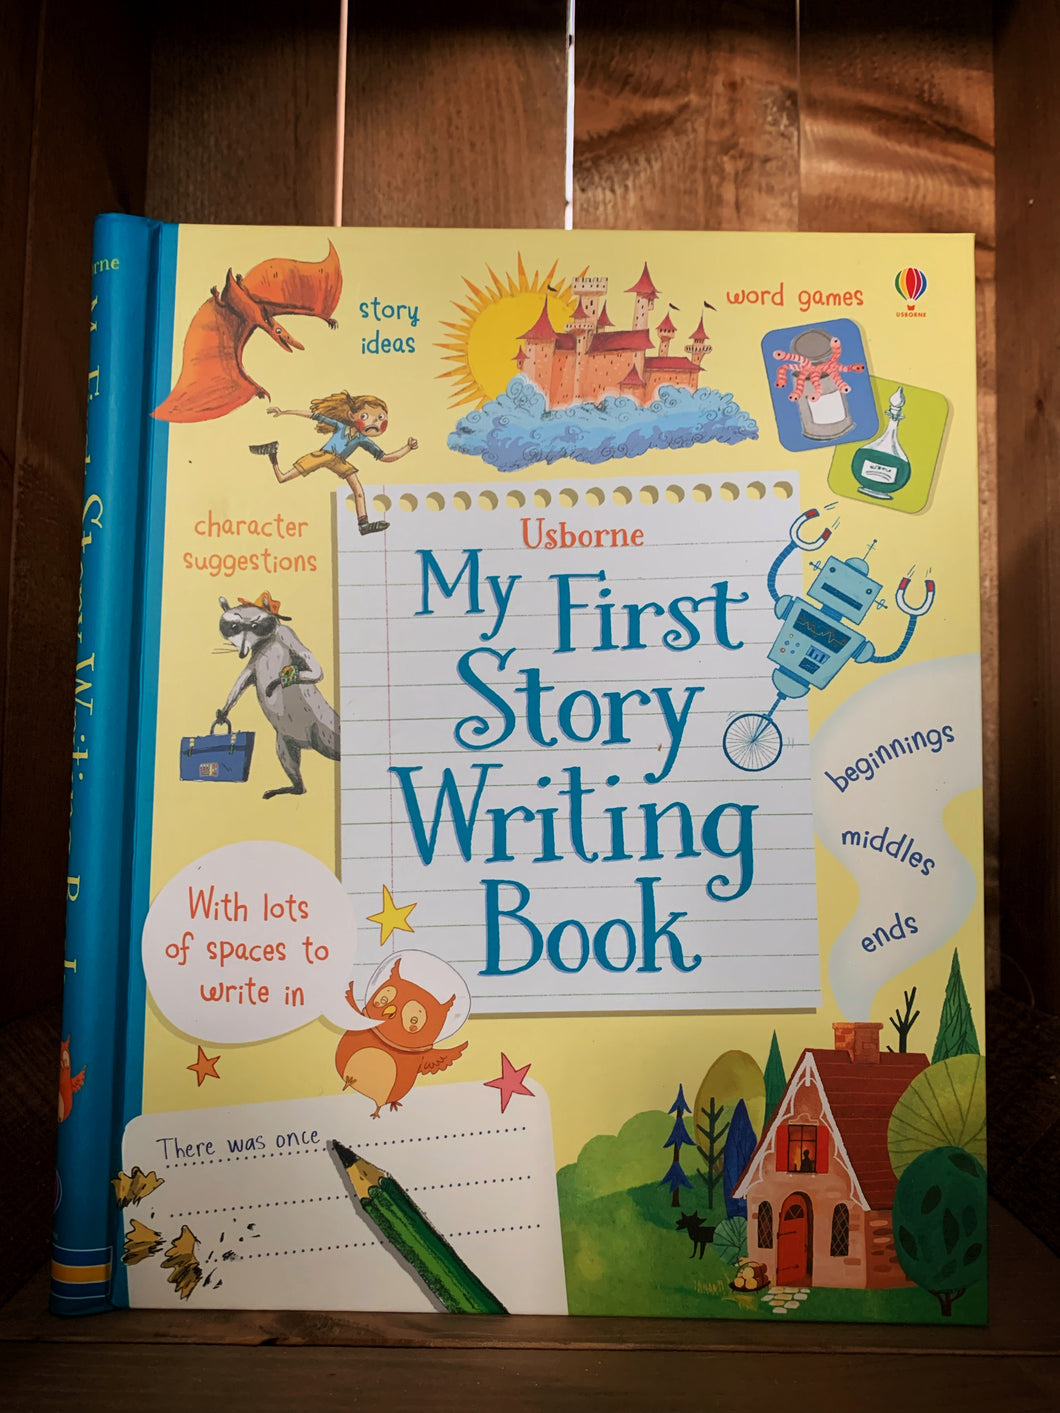 Image of the front cover of My First Story Writing Book. The cover has a yellow background with a blue spine, and features various settings and characters that could feature in stories. This includes a house in a forest, a castle in the clouds, a robot, a raccoon holding a suitcase, and a dragon chasing someone. It also features text explaining what kinds of  tips the book has inside. 